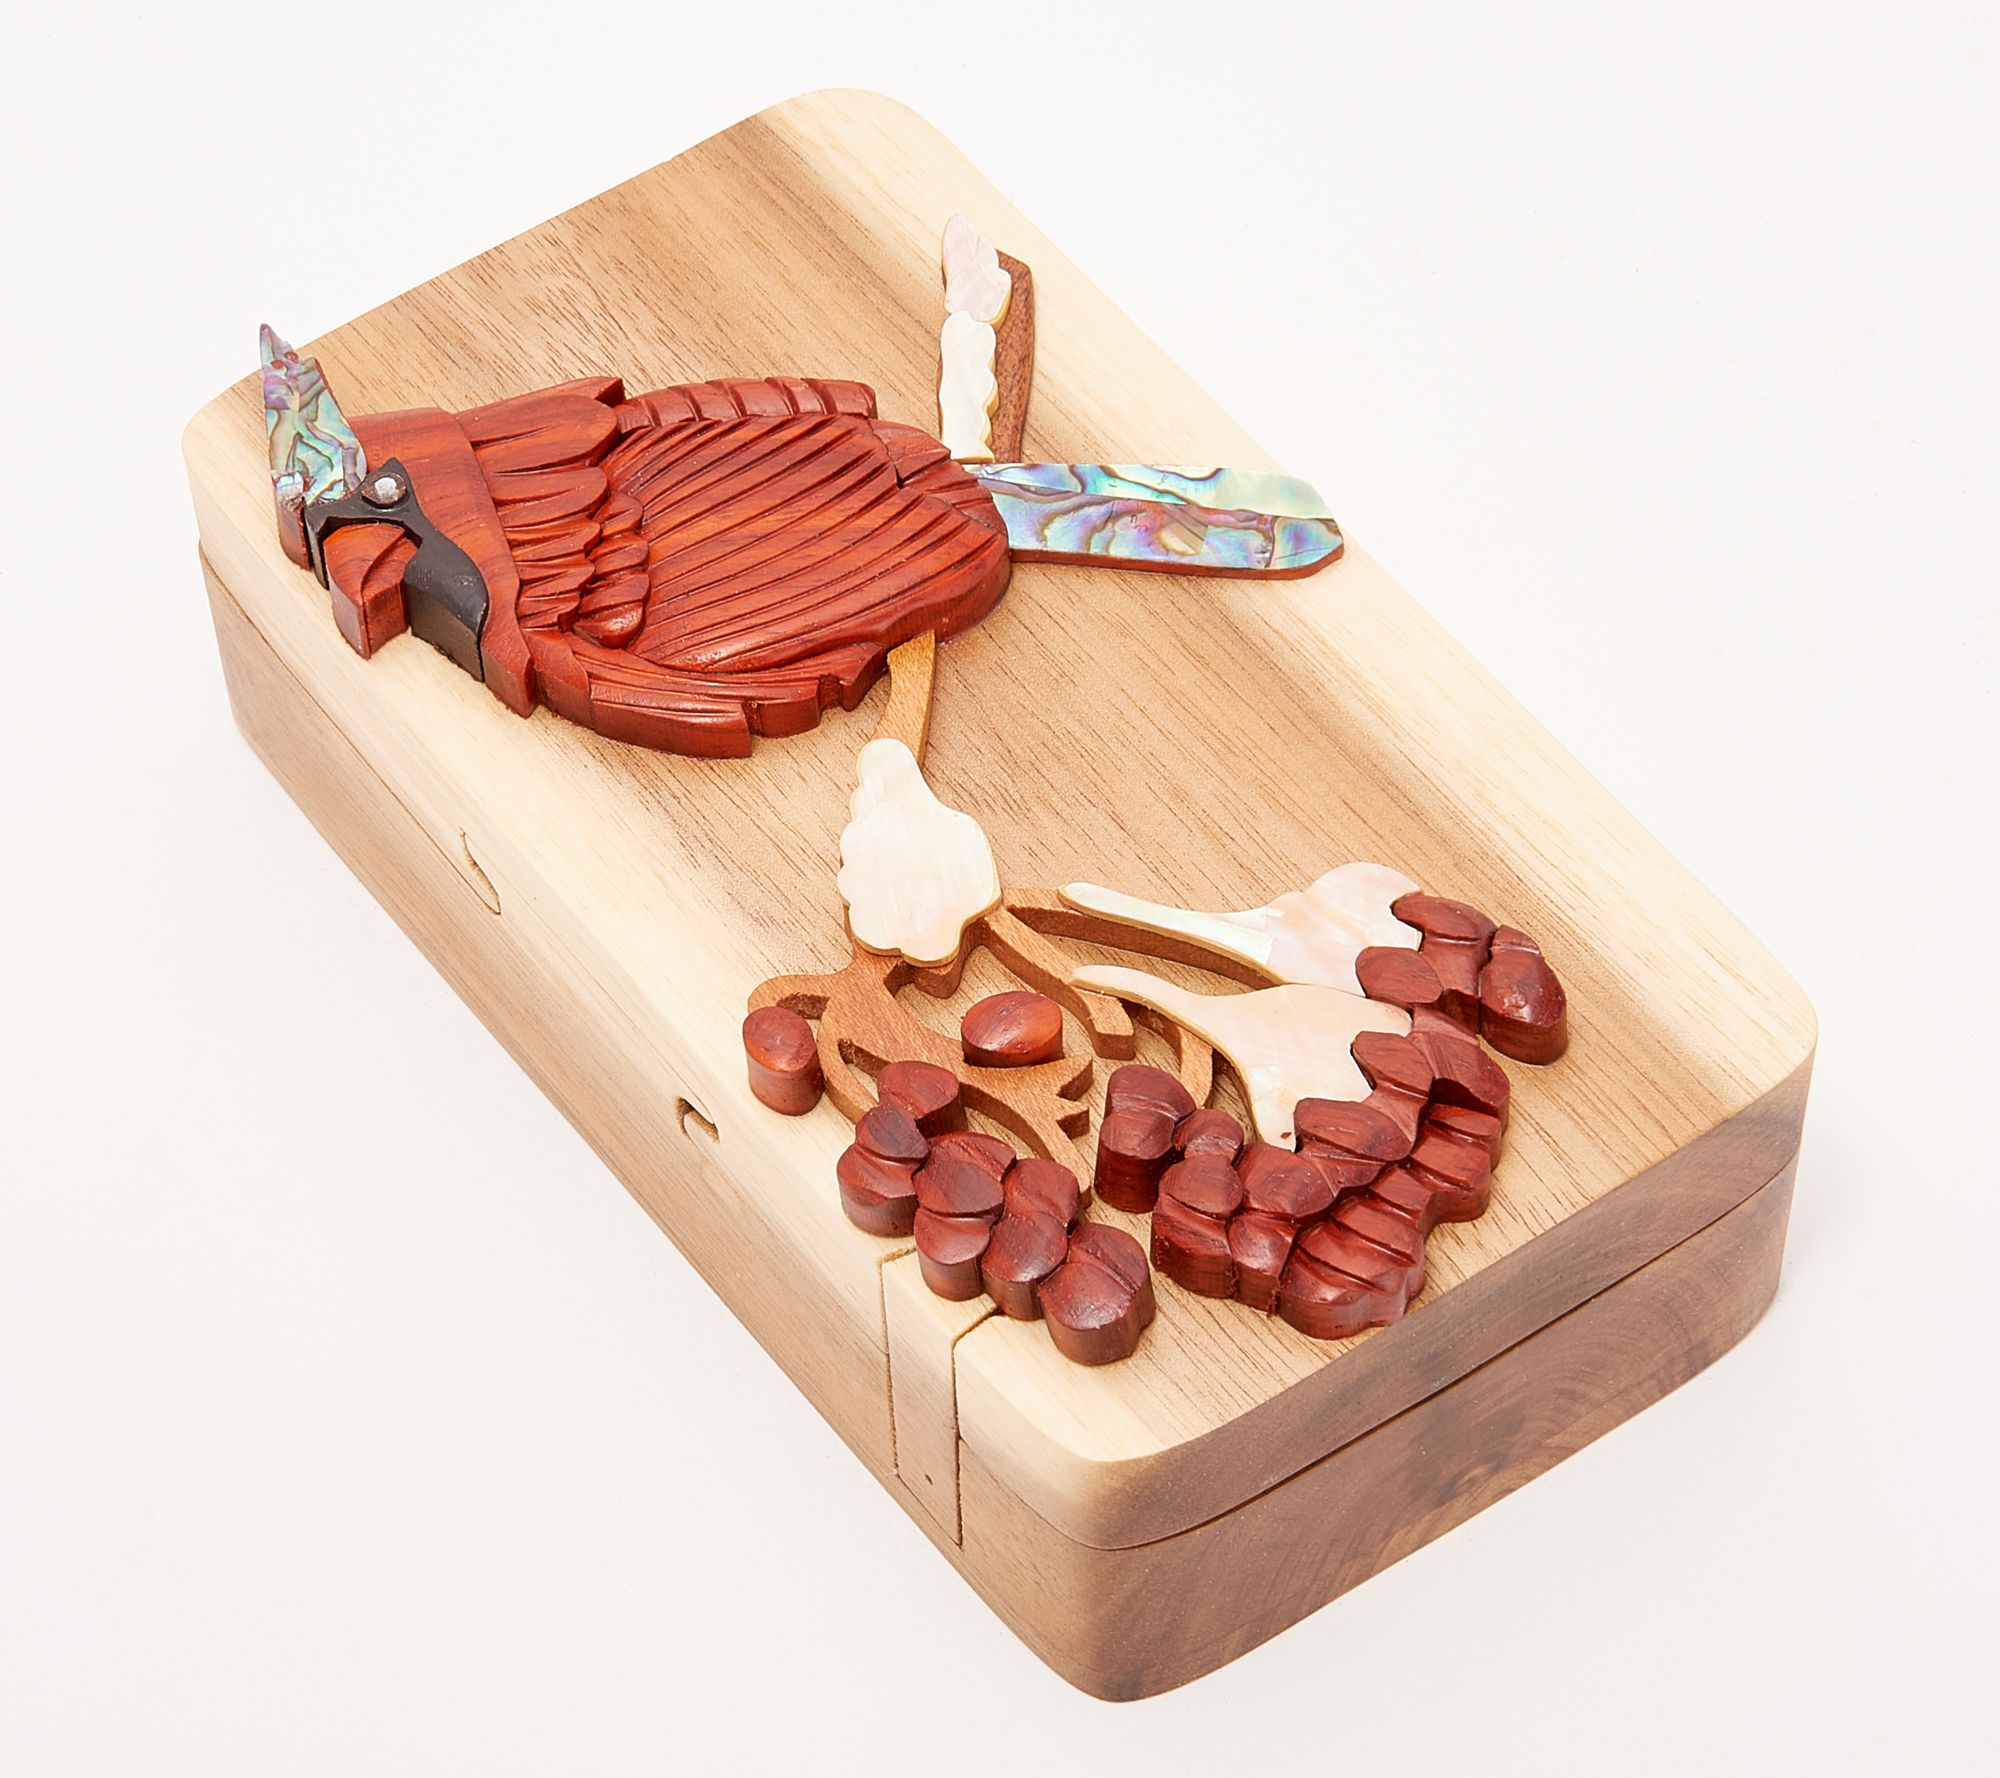 Carver Dan's Fish for Dinner Puzzle Box with Magnet Closures 